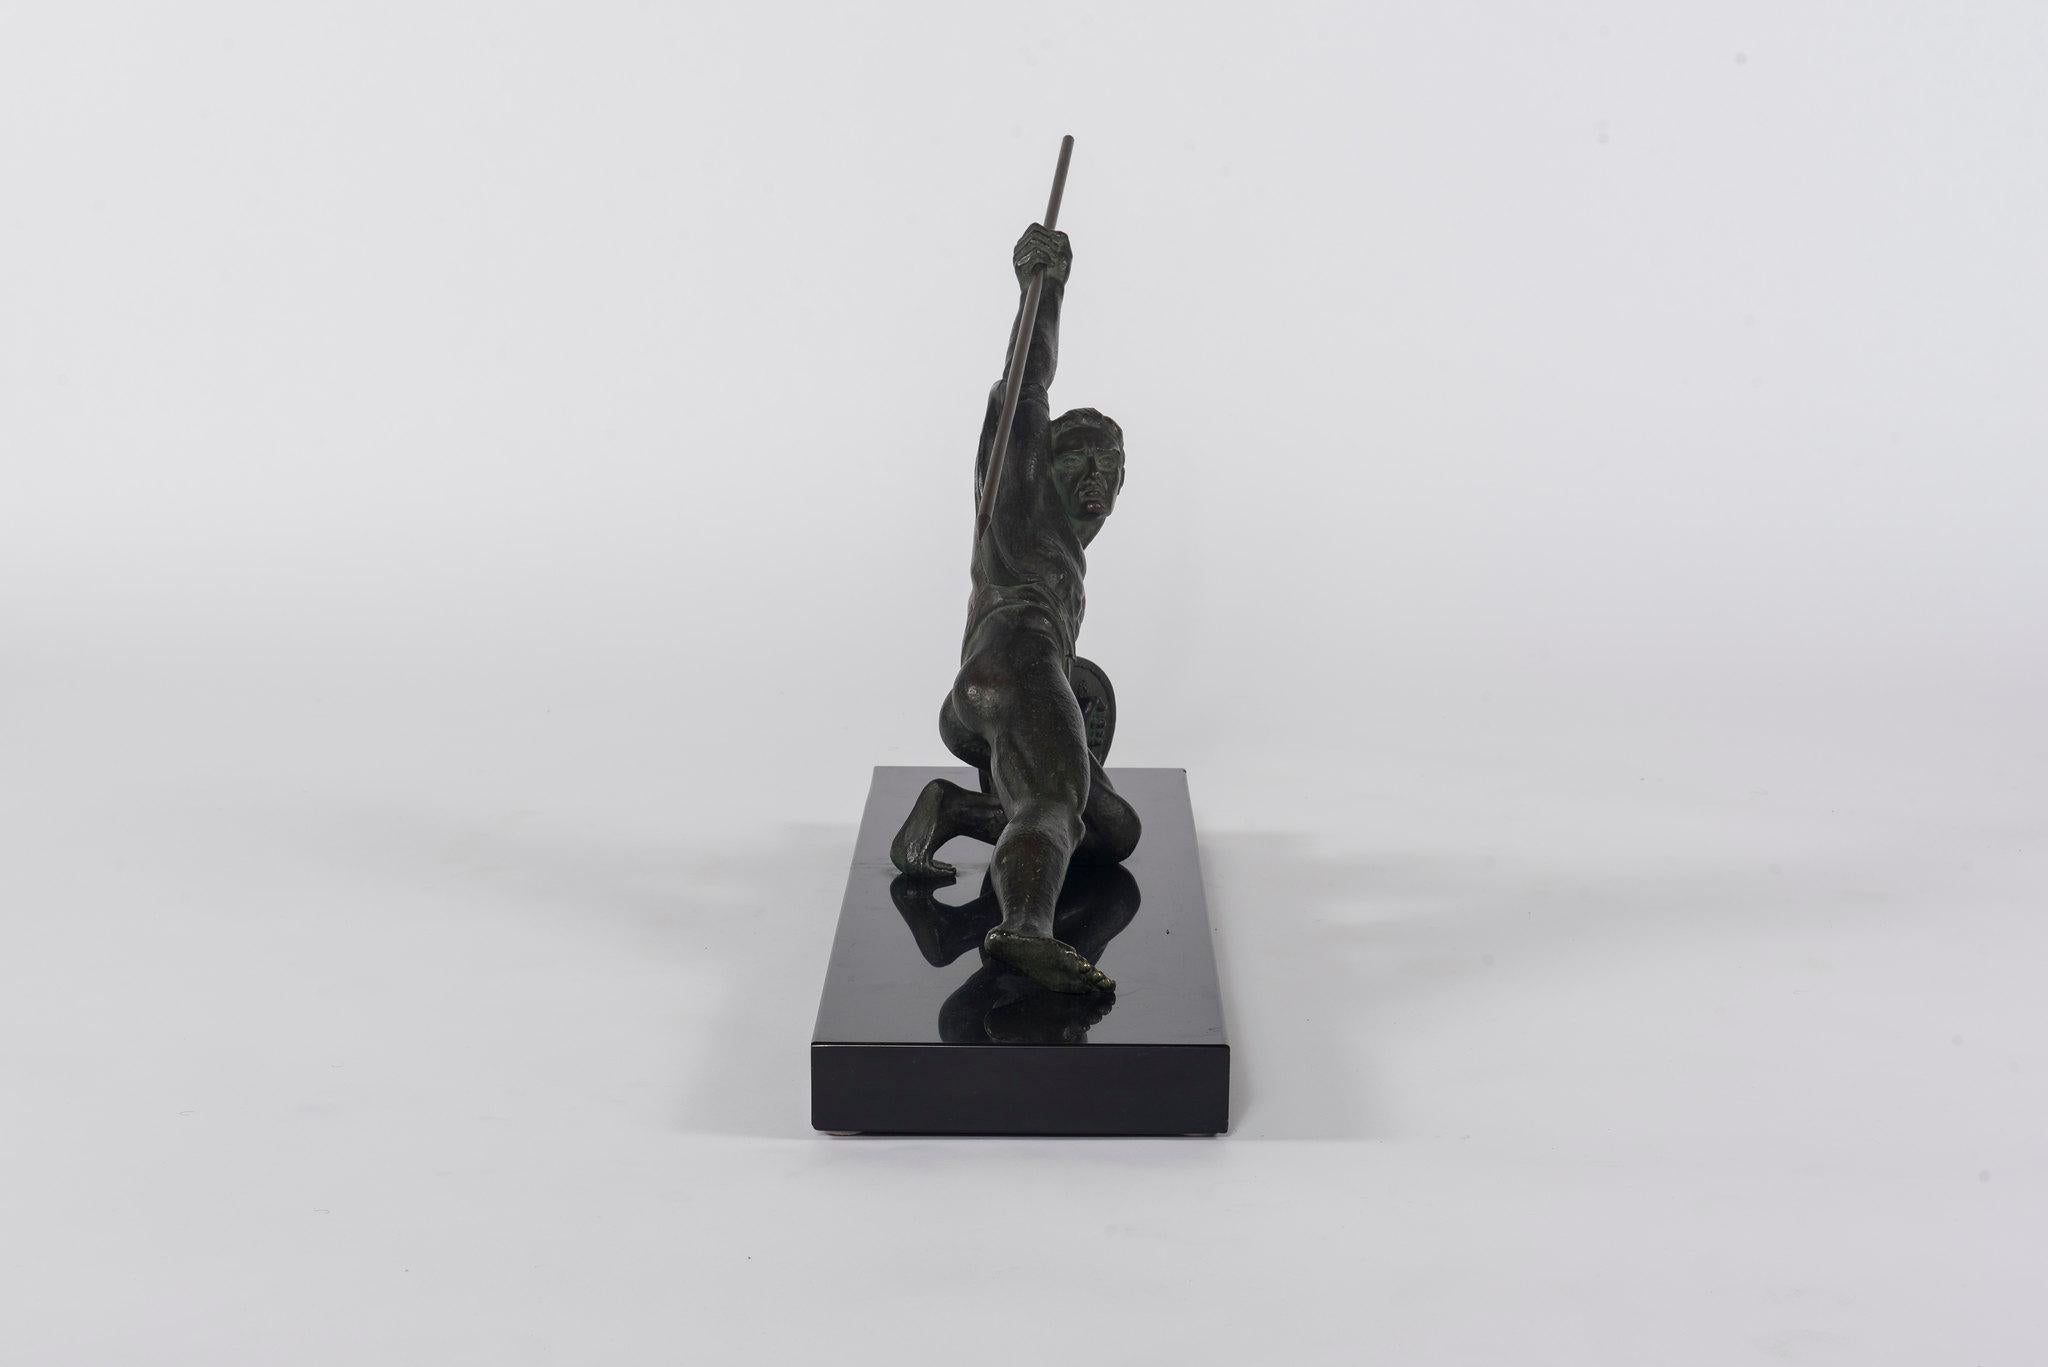 A 1930s French Art Deco bronze Roman warrior figure with spear and shield on black marble base.